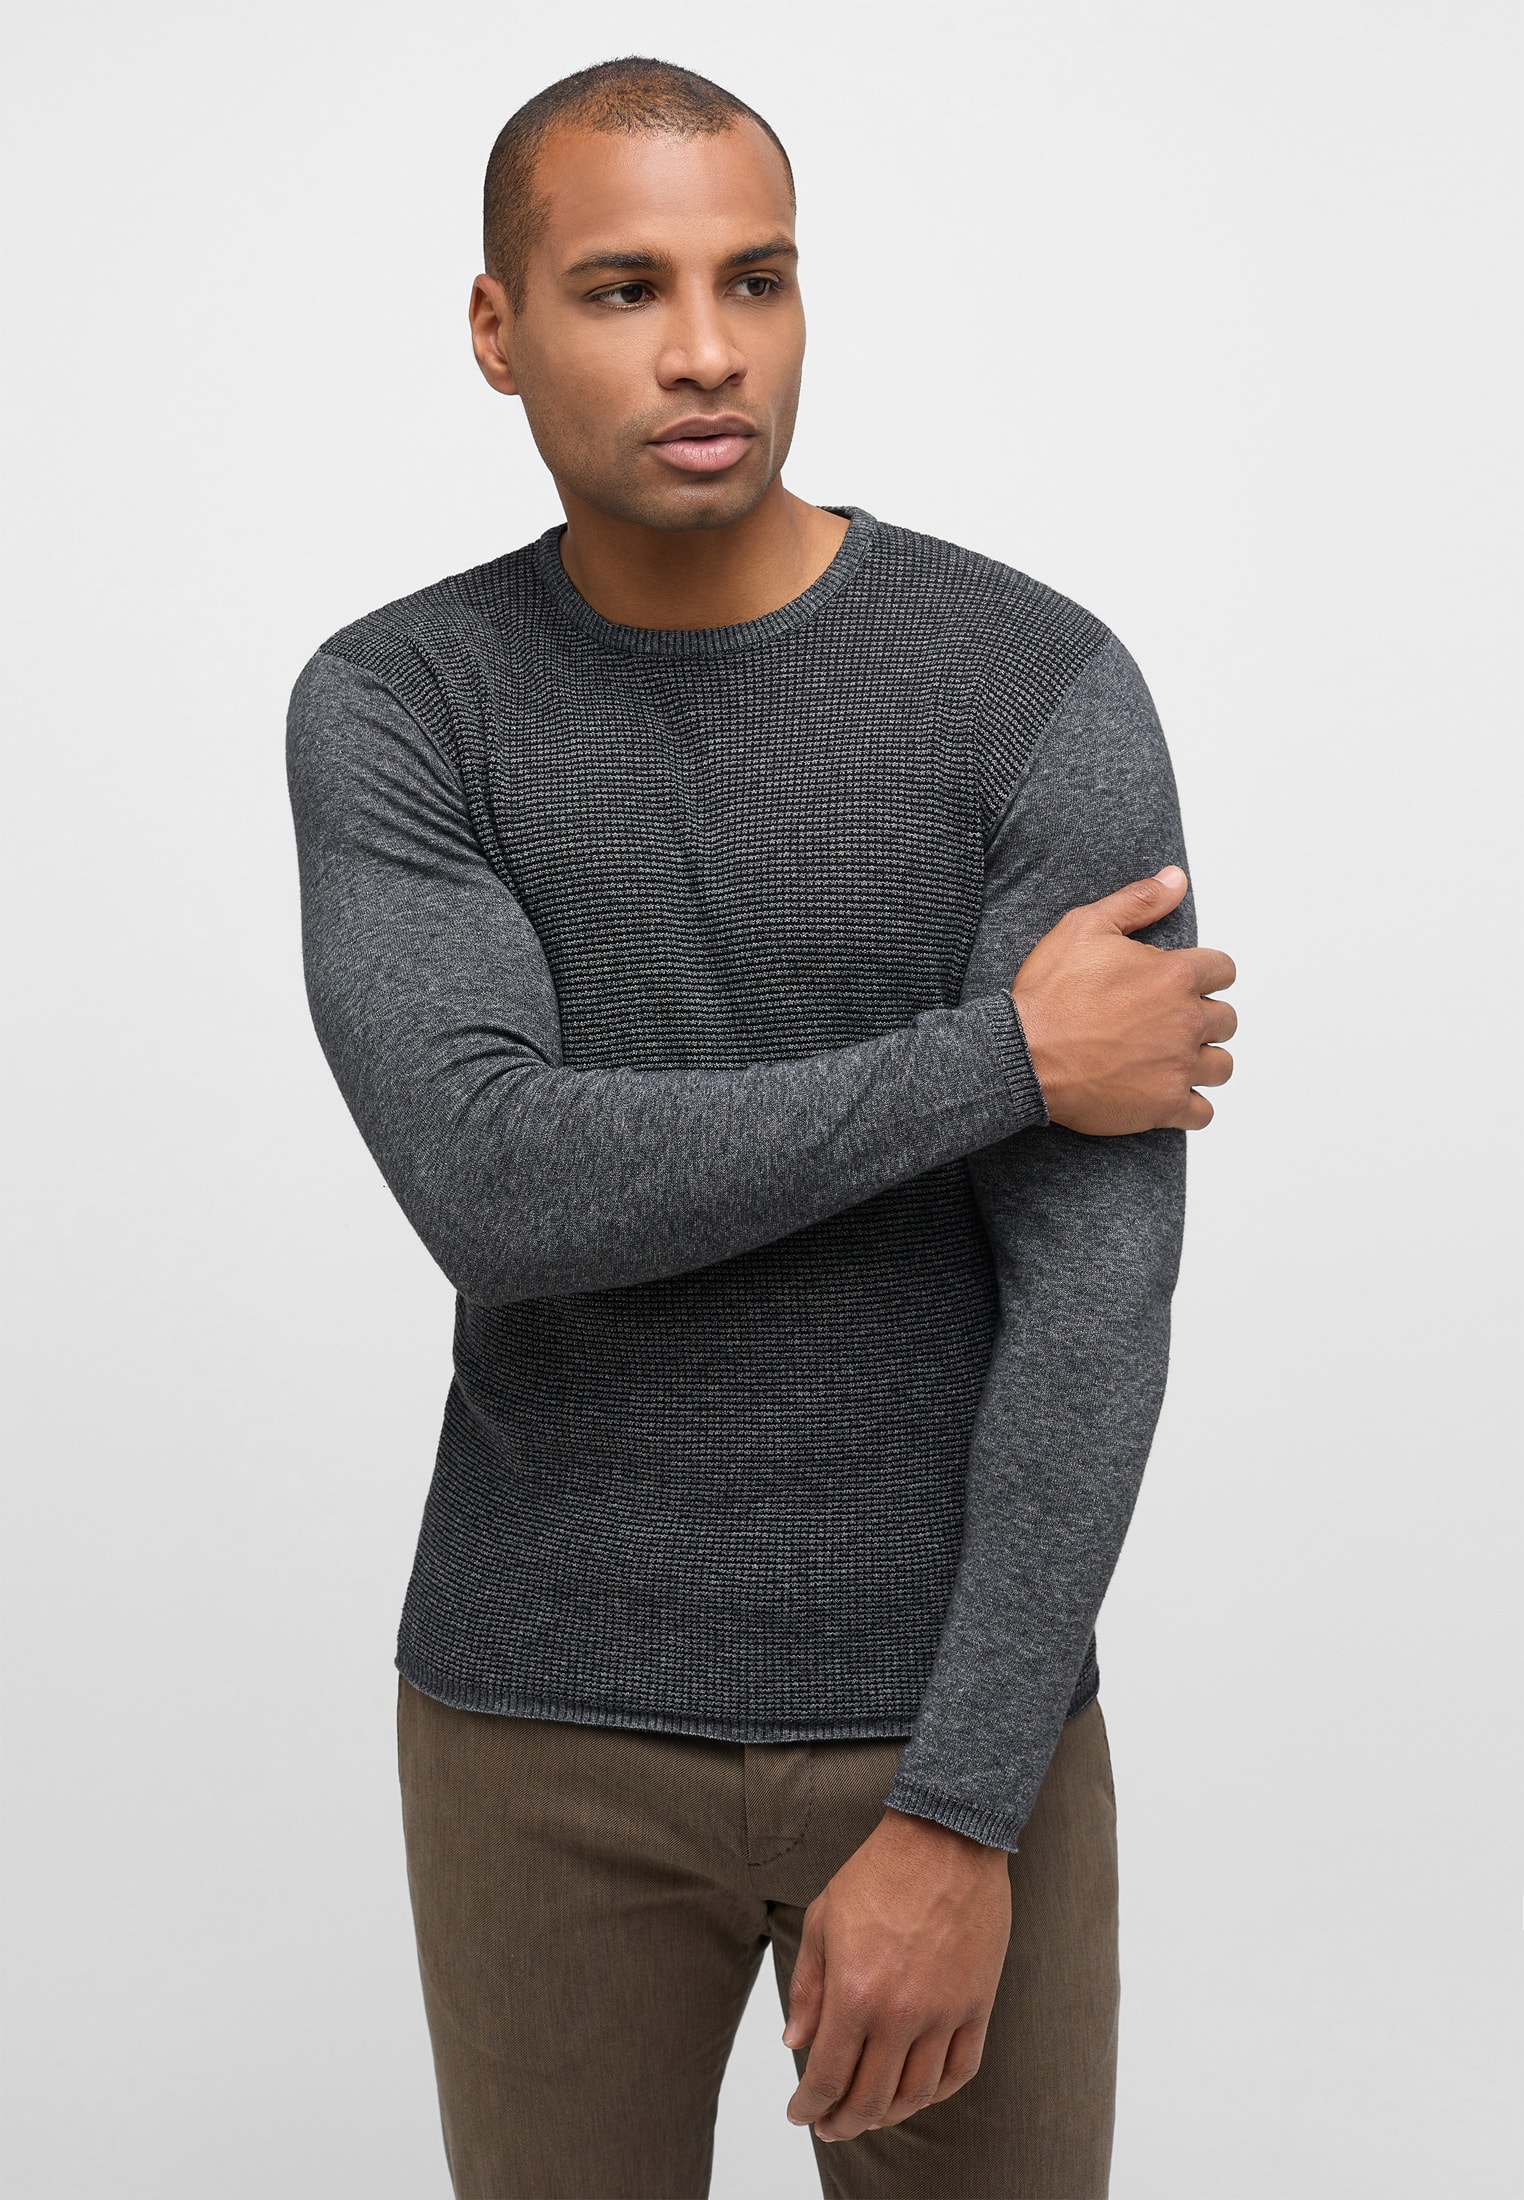 Knitted jumper in anthracite structured